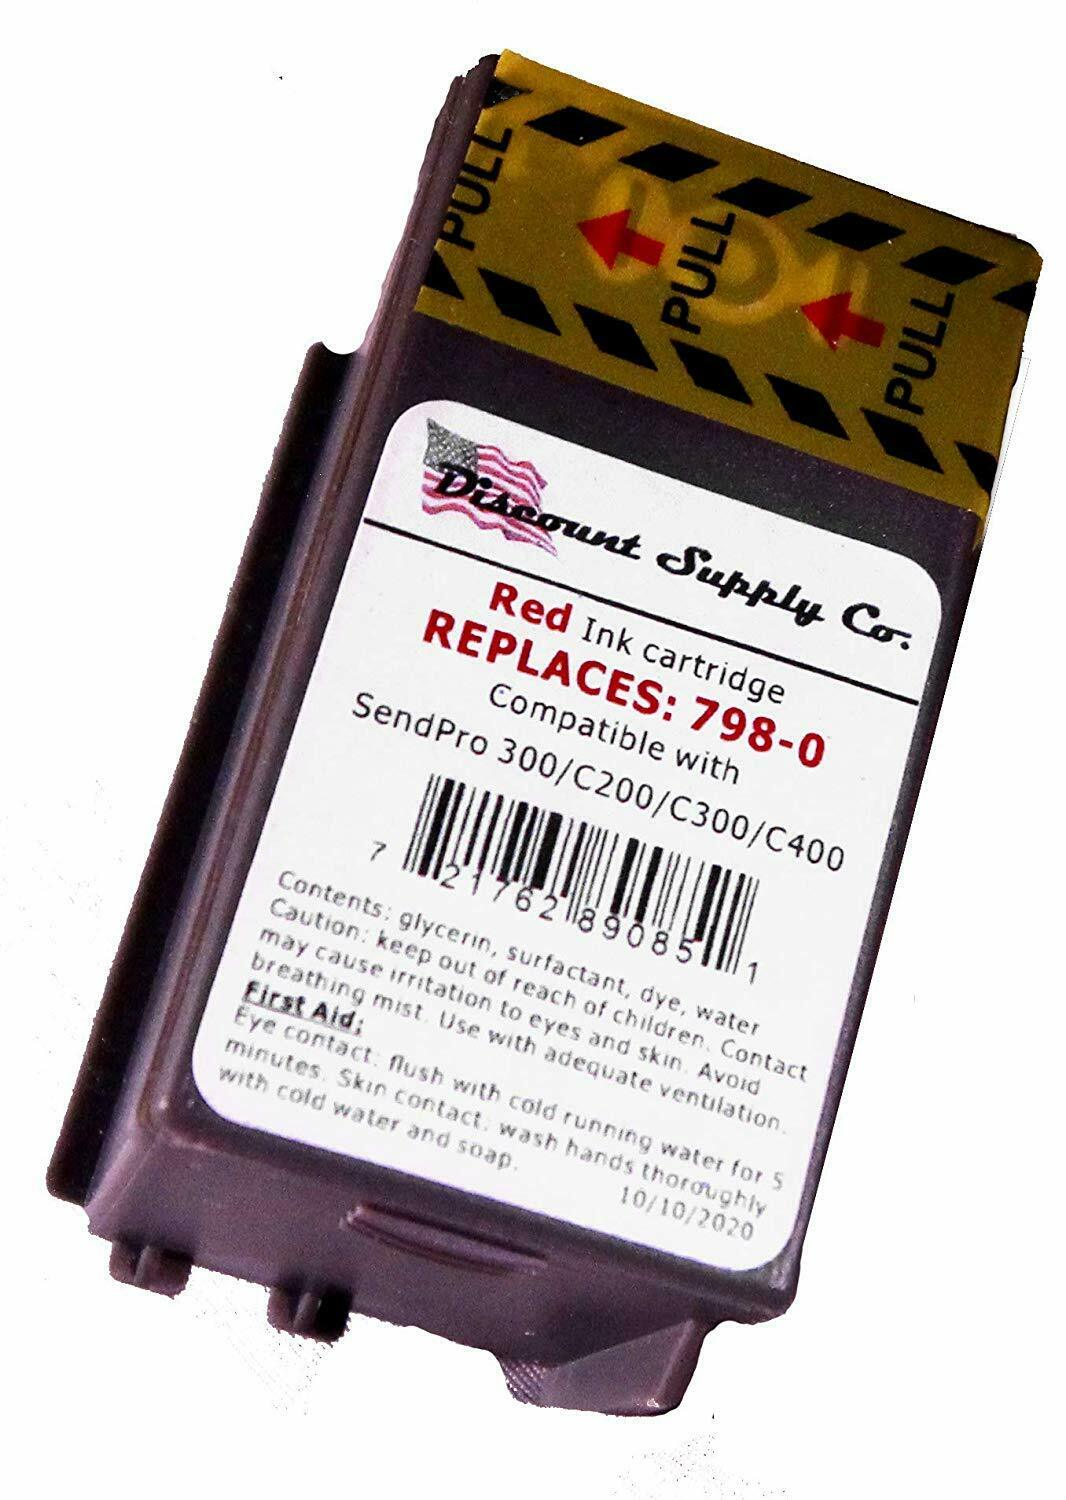 Sl-798-0 Pitney Bowes Compatible Ink Cartridge For Sendpro C200, C300, C400